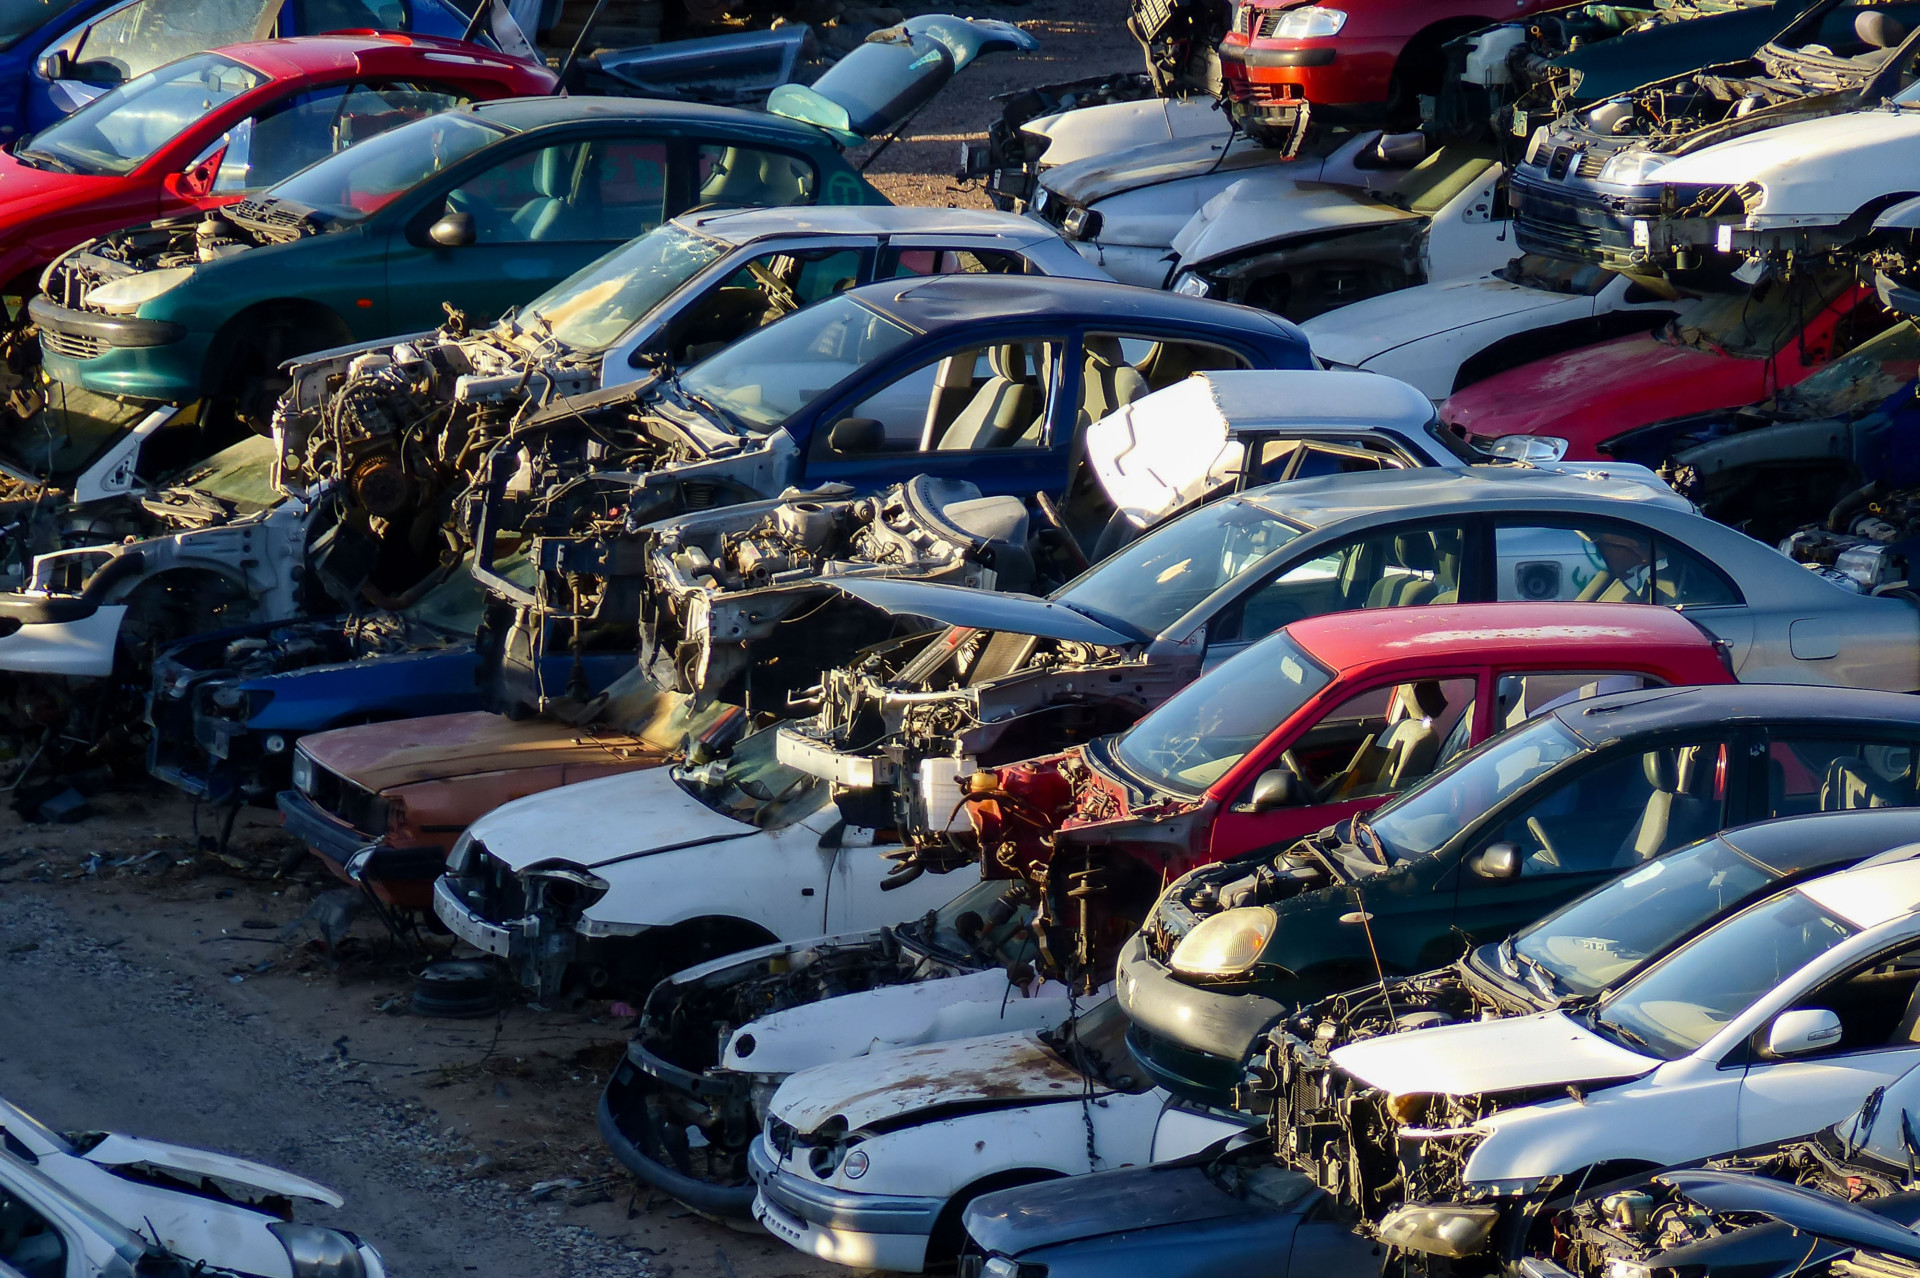 Over £4 million in scrap cars around Omagh and Strabane